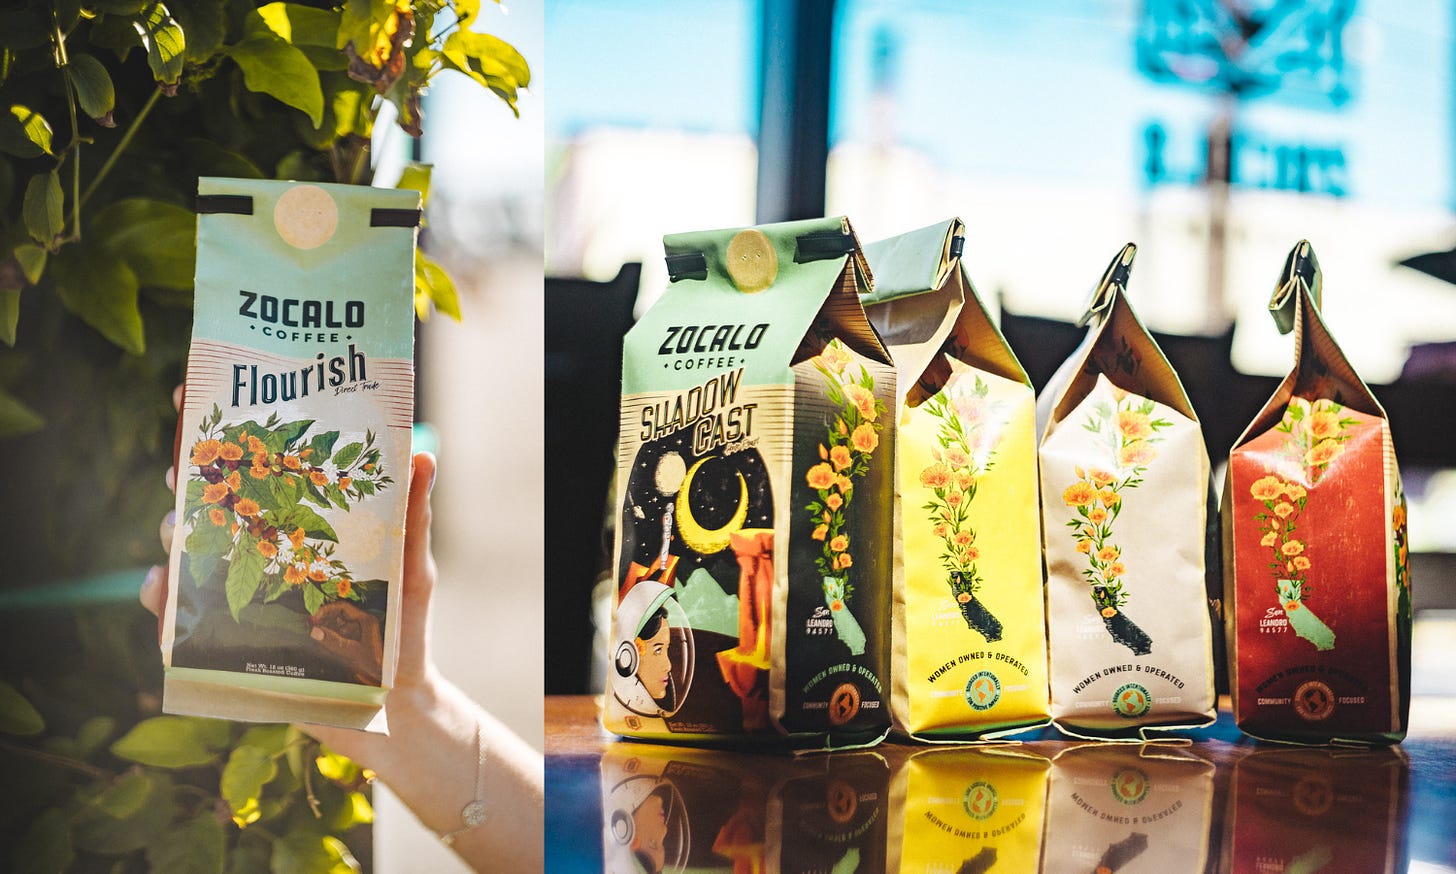 Floral illustrations coming out of the shape of California adorn the side of several coffee bags lined up on a table and a secondary photo with the front of the bag being shown to the camera featuring a floral illustration.